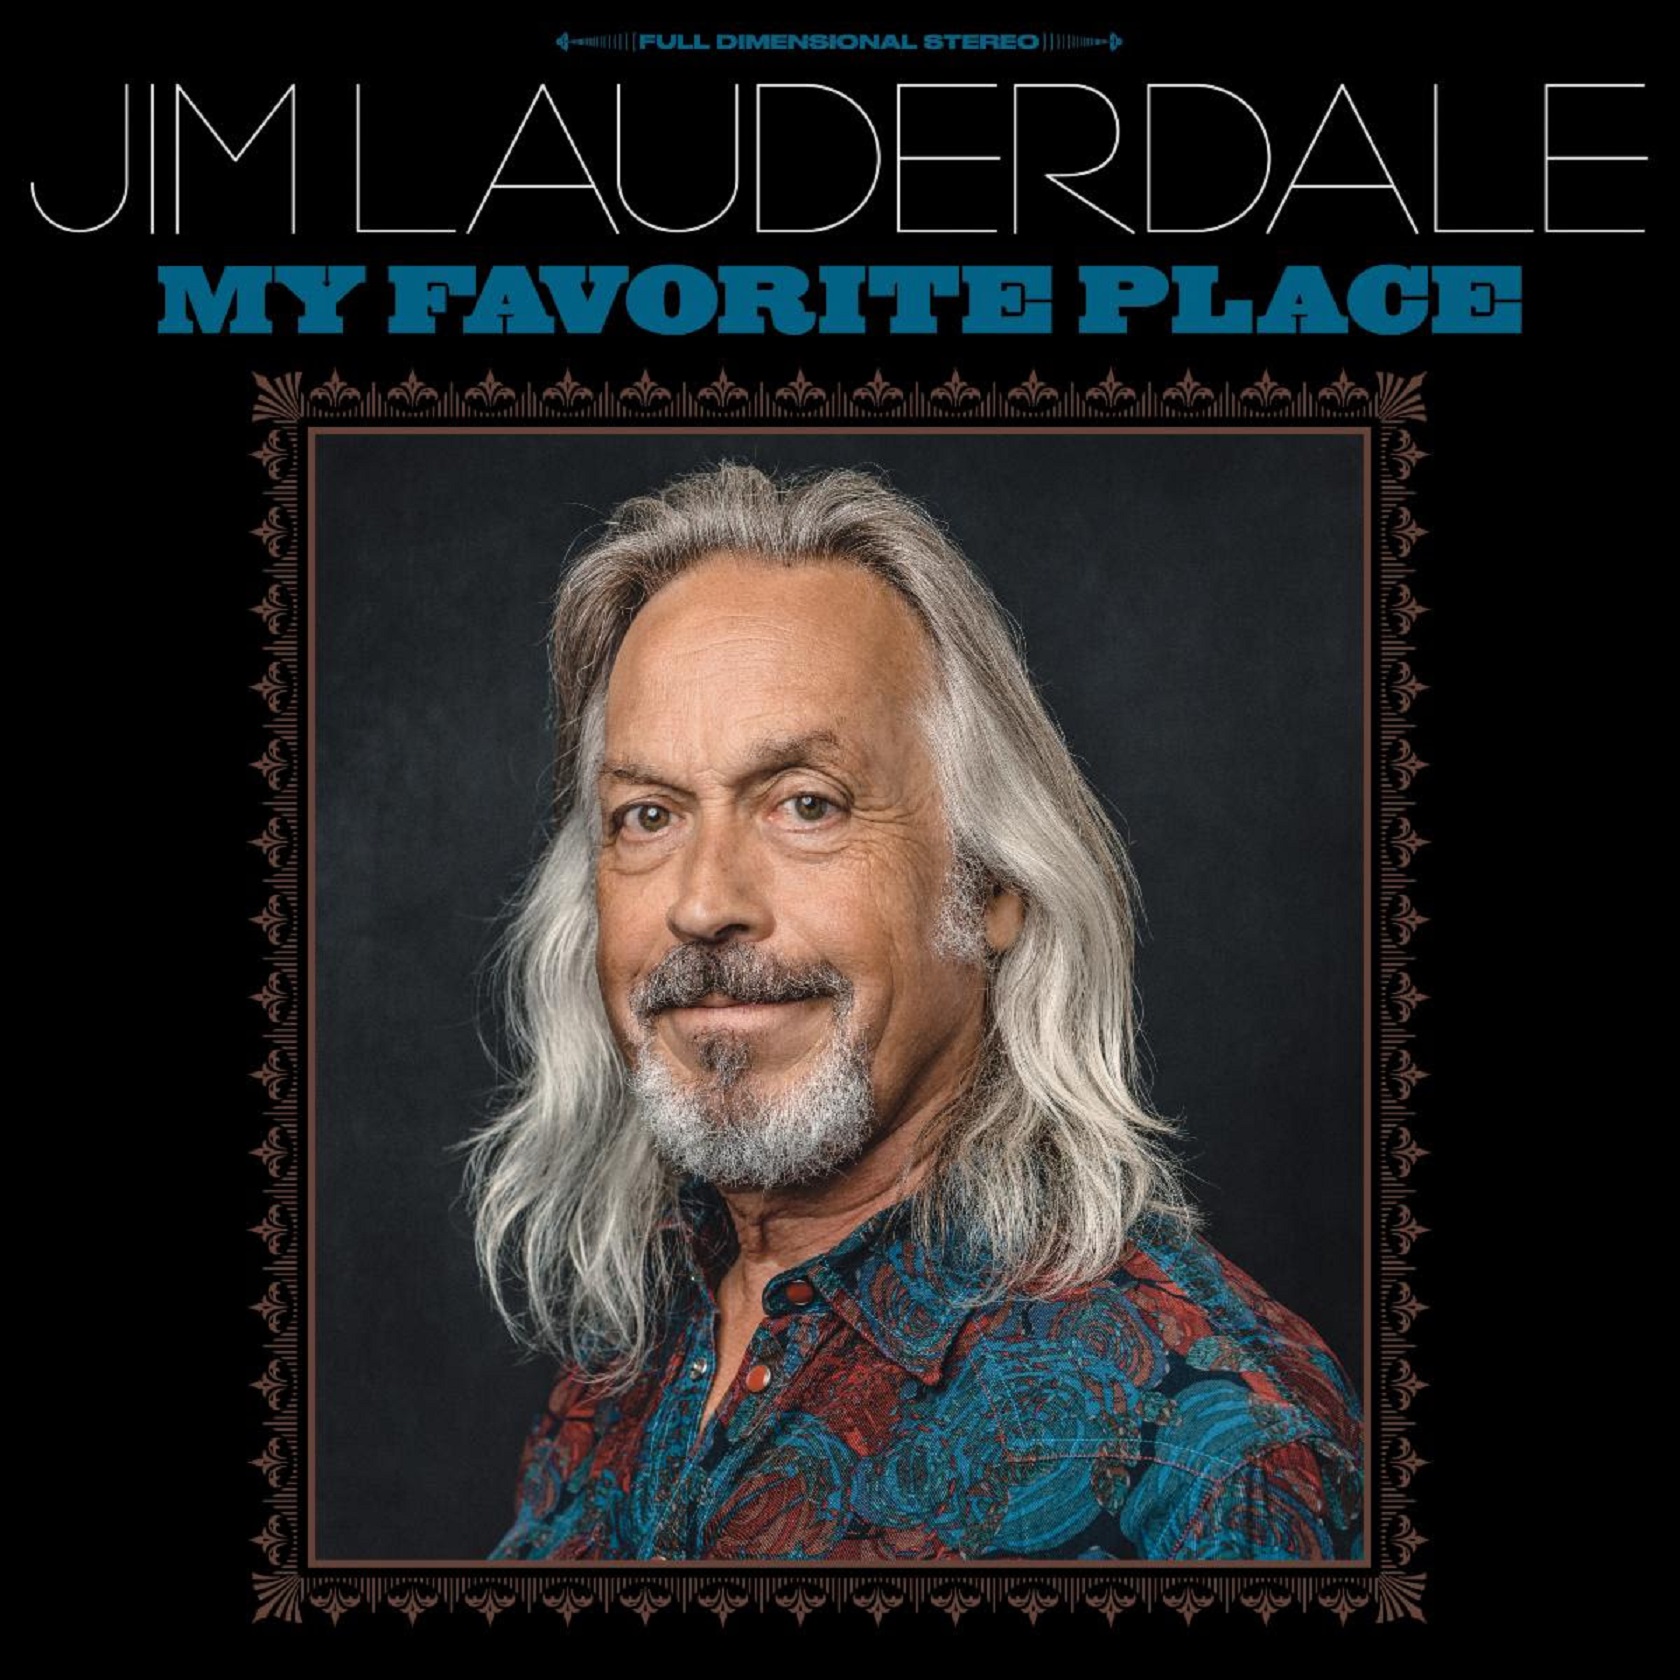 Hear Jim Lauderdale Resign To His Own Fate On “I’m A Lucky Loser”